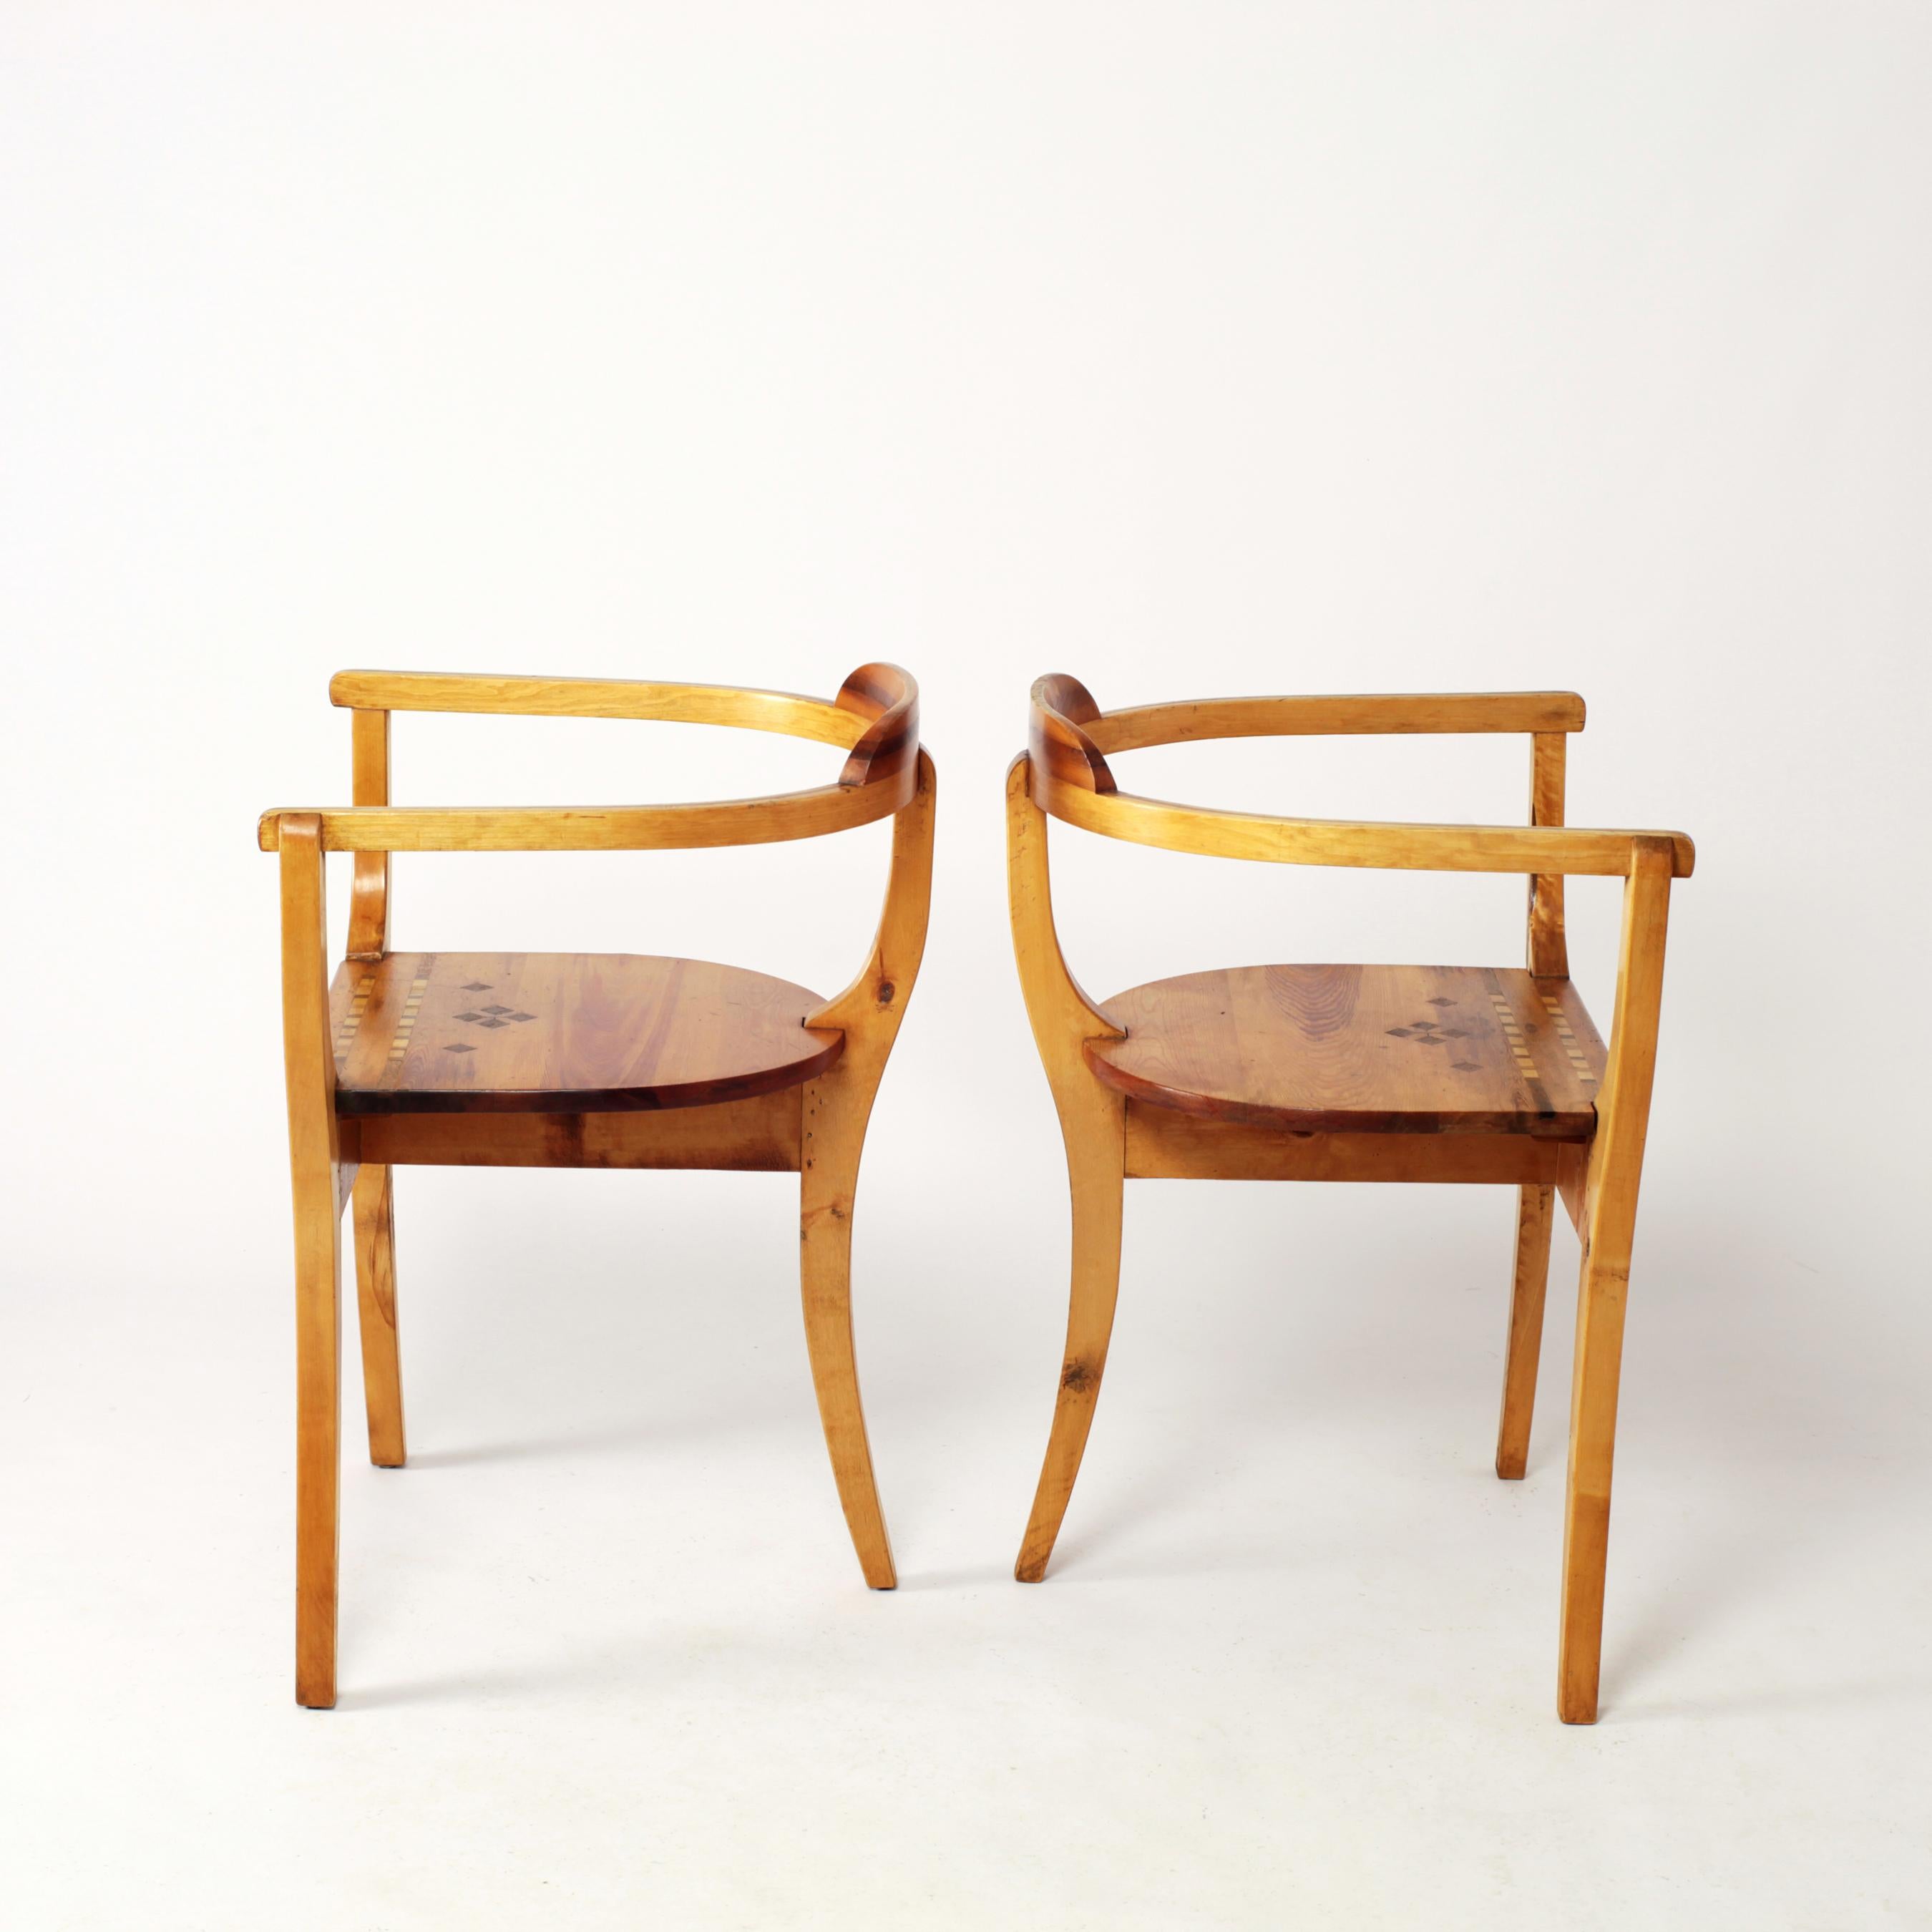 Hand-Crafted Pair of Handcrafted Pinewood Armchairs, Sweden, 1942